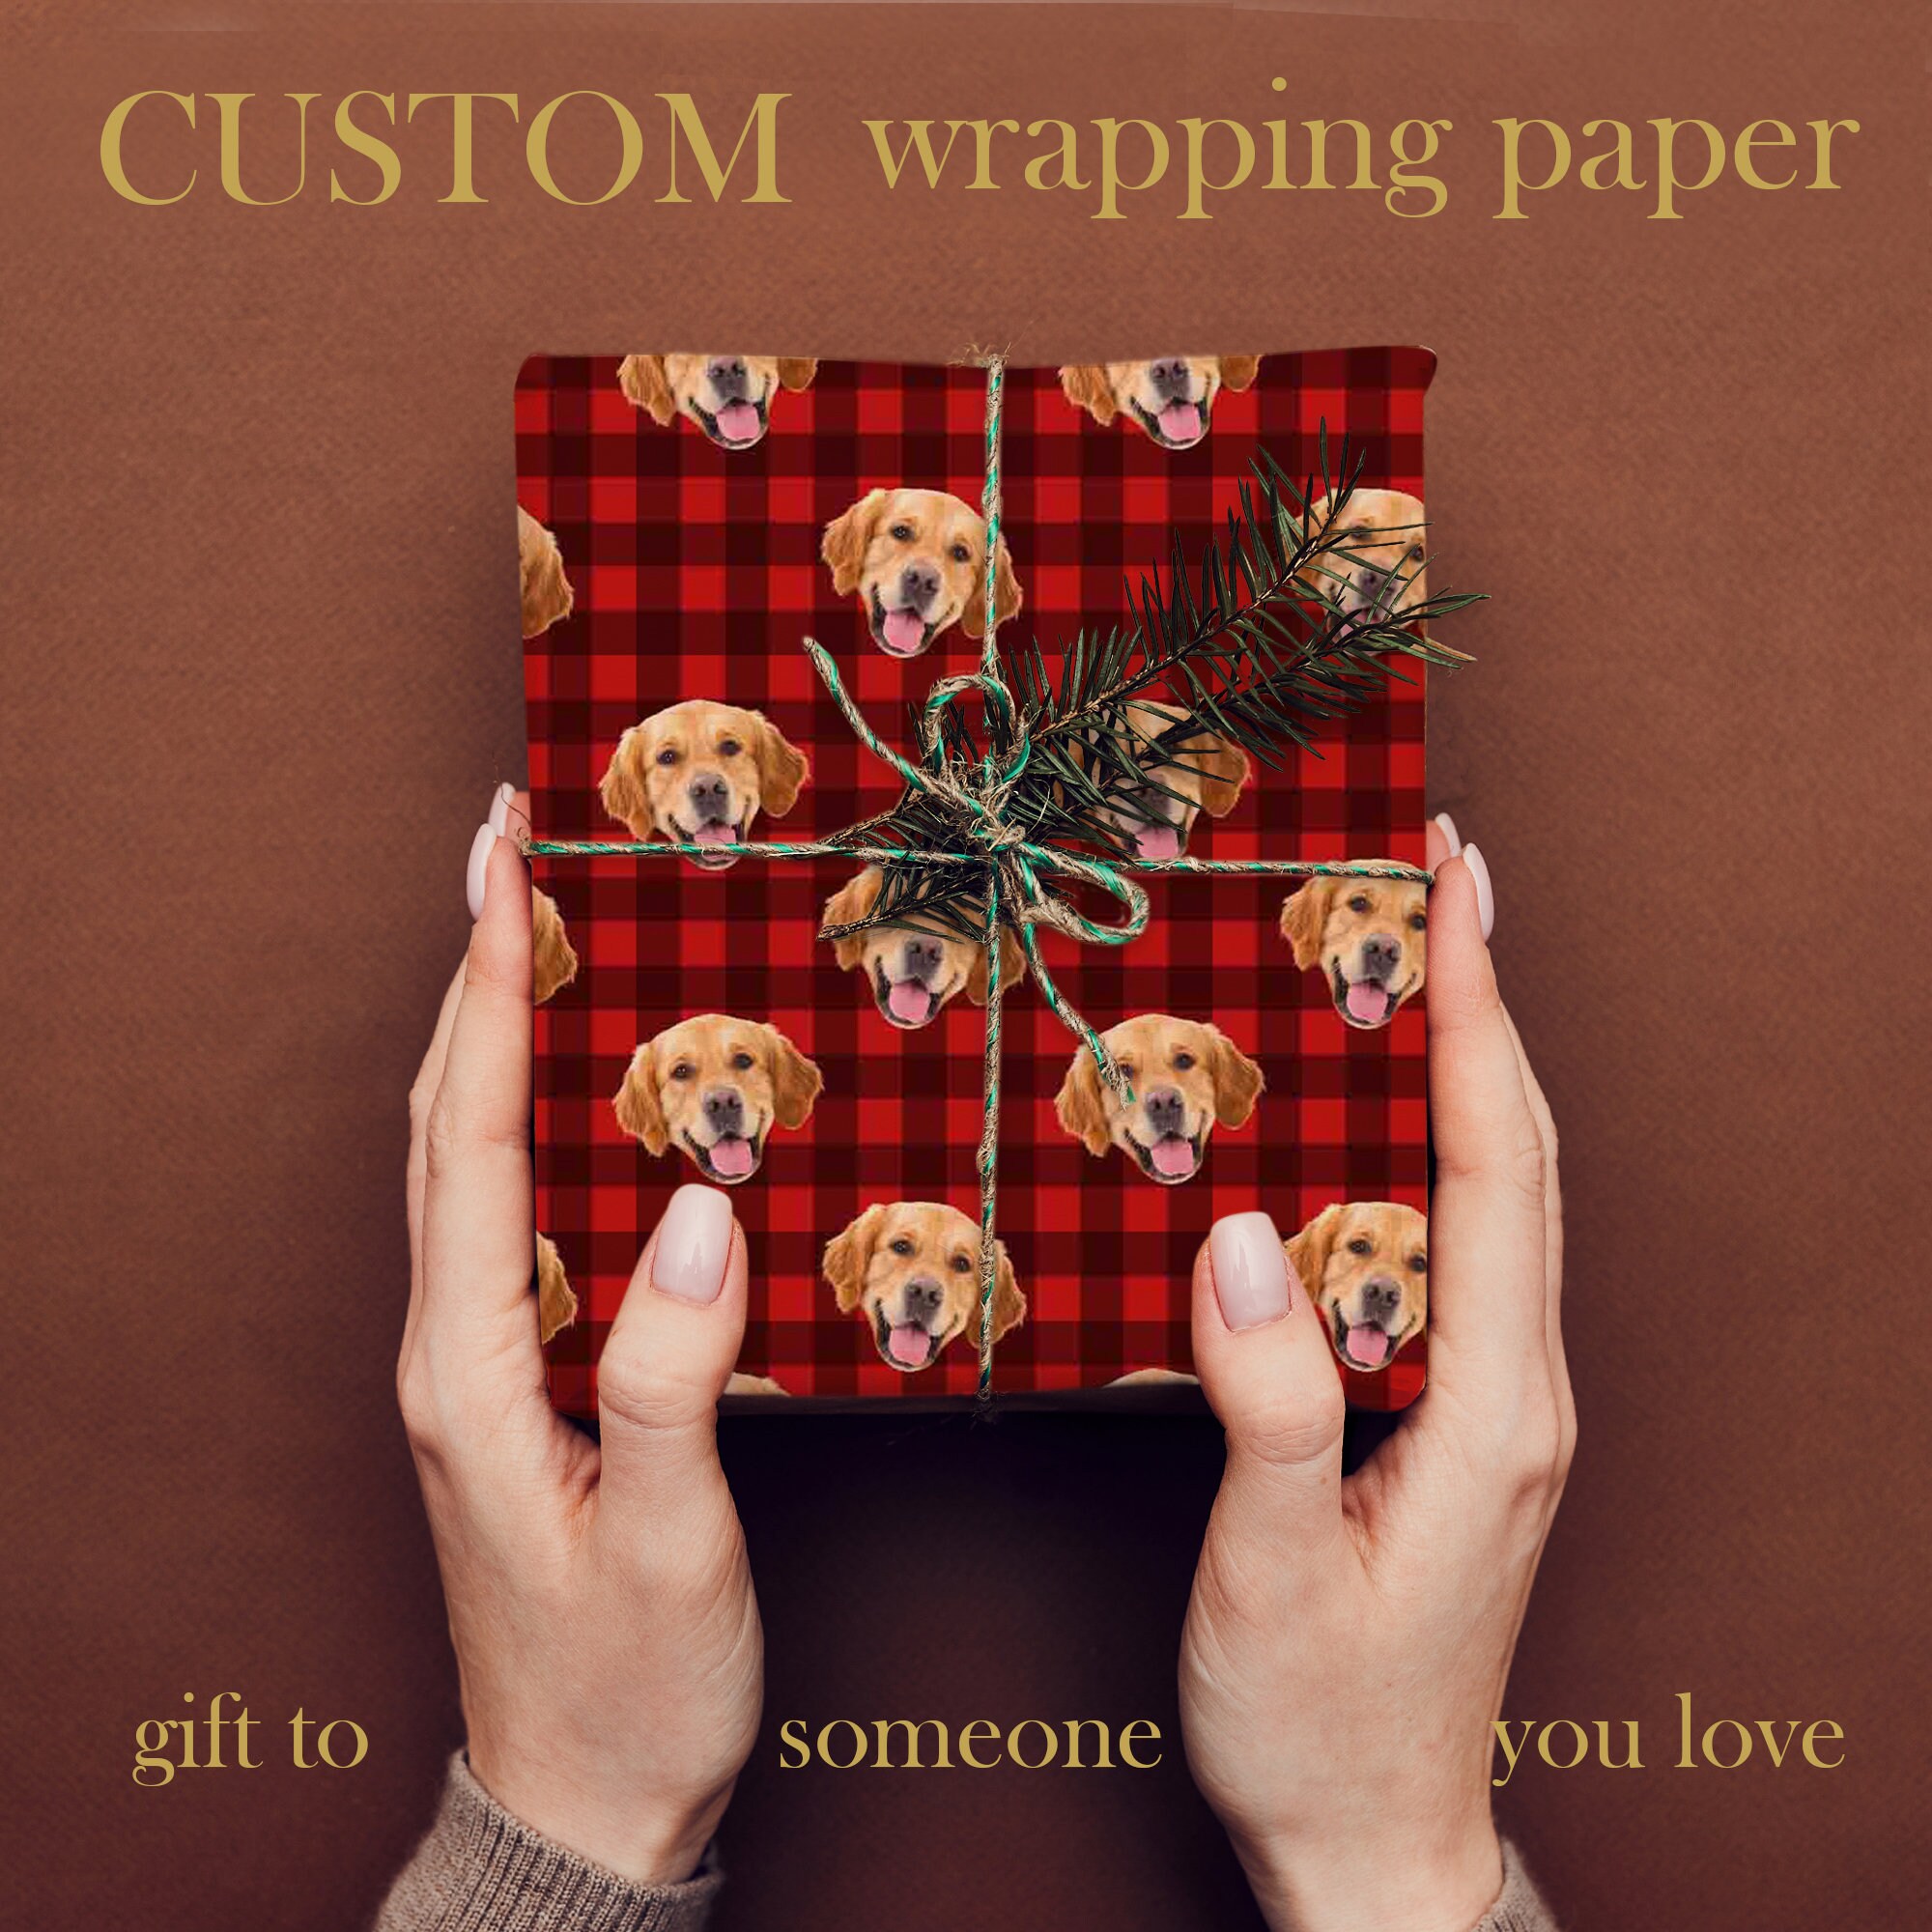 Wrapping Paper Gift Wrap Sheets With a Fun Boho Desert Chic Design